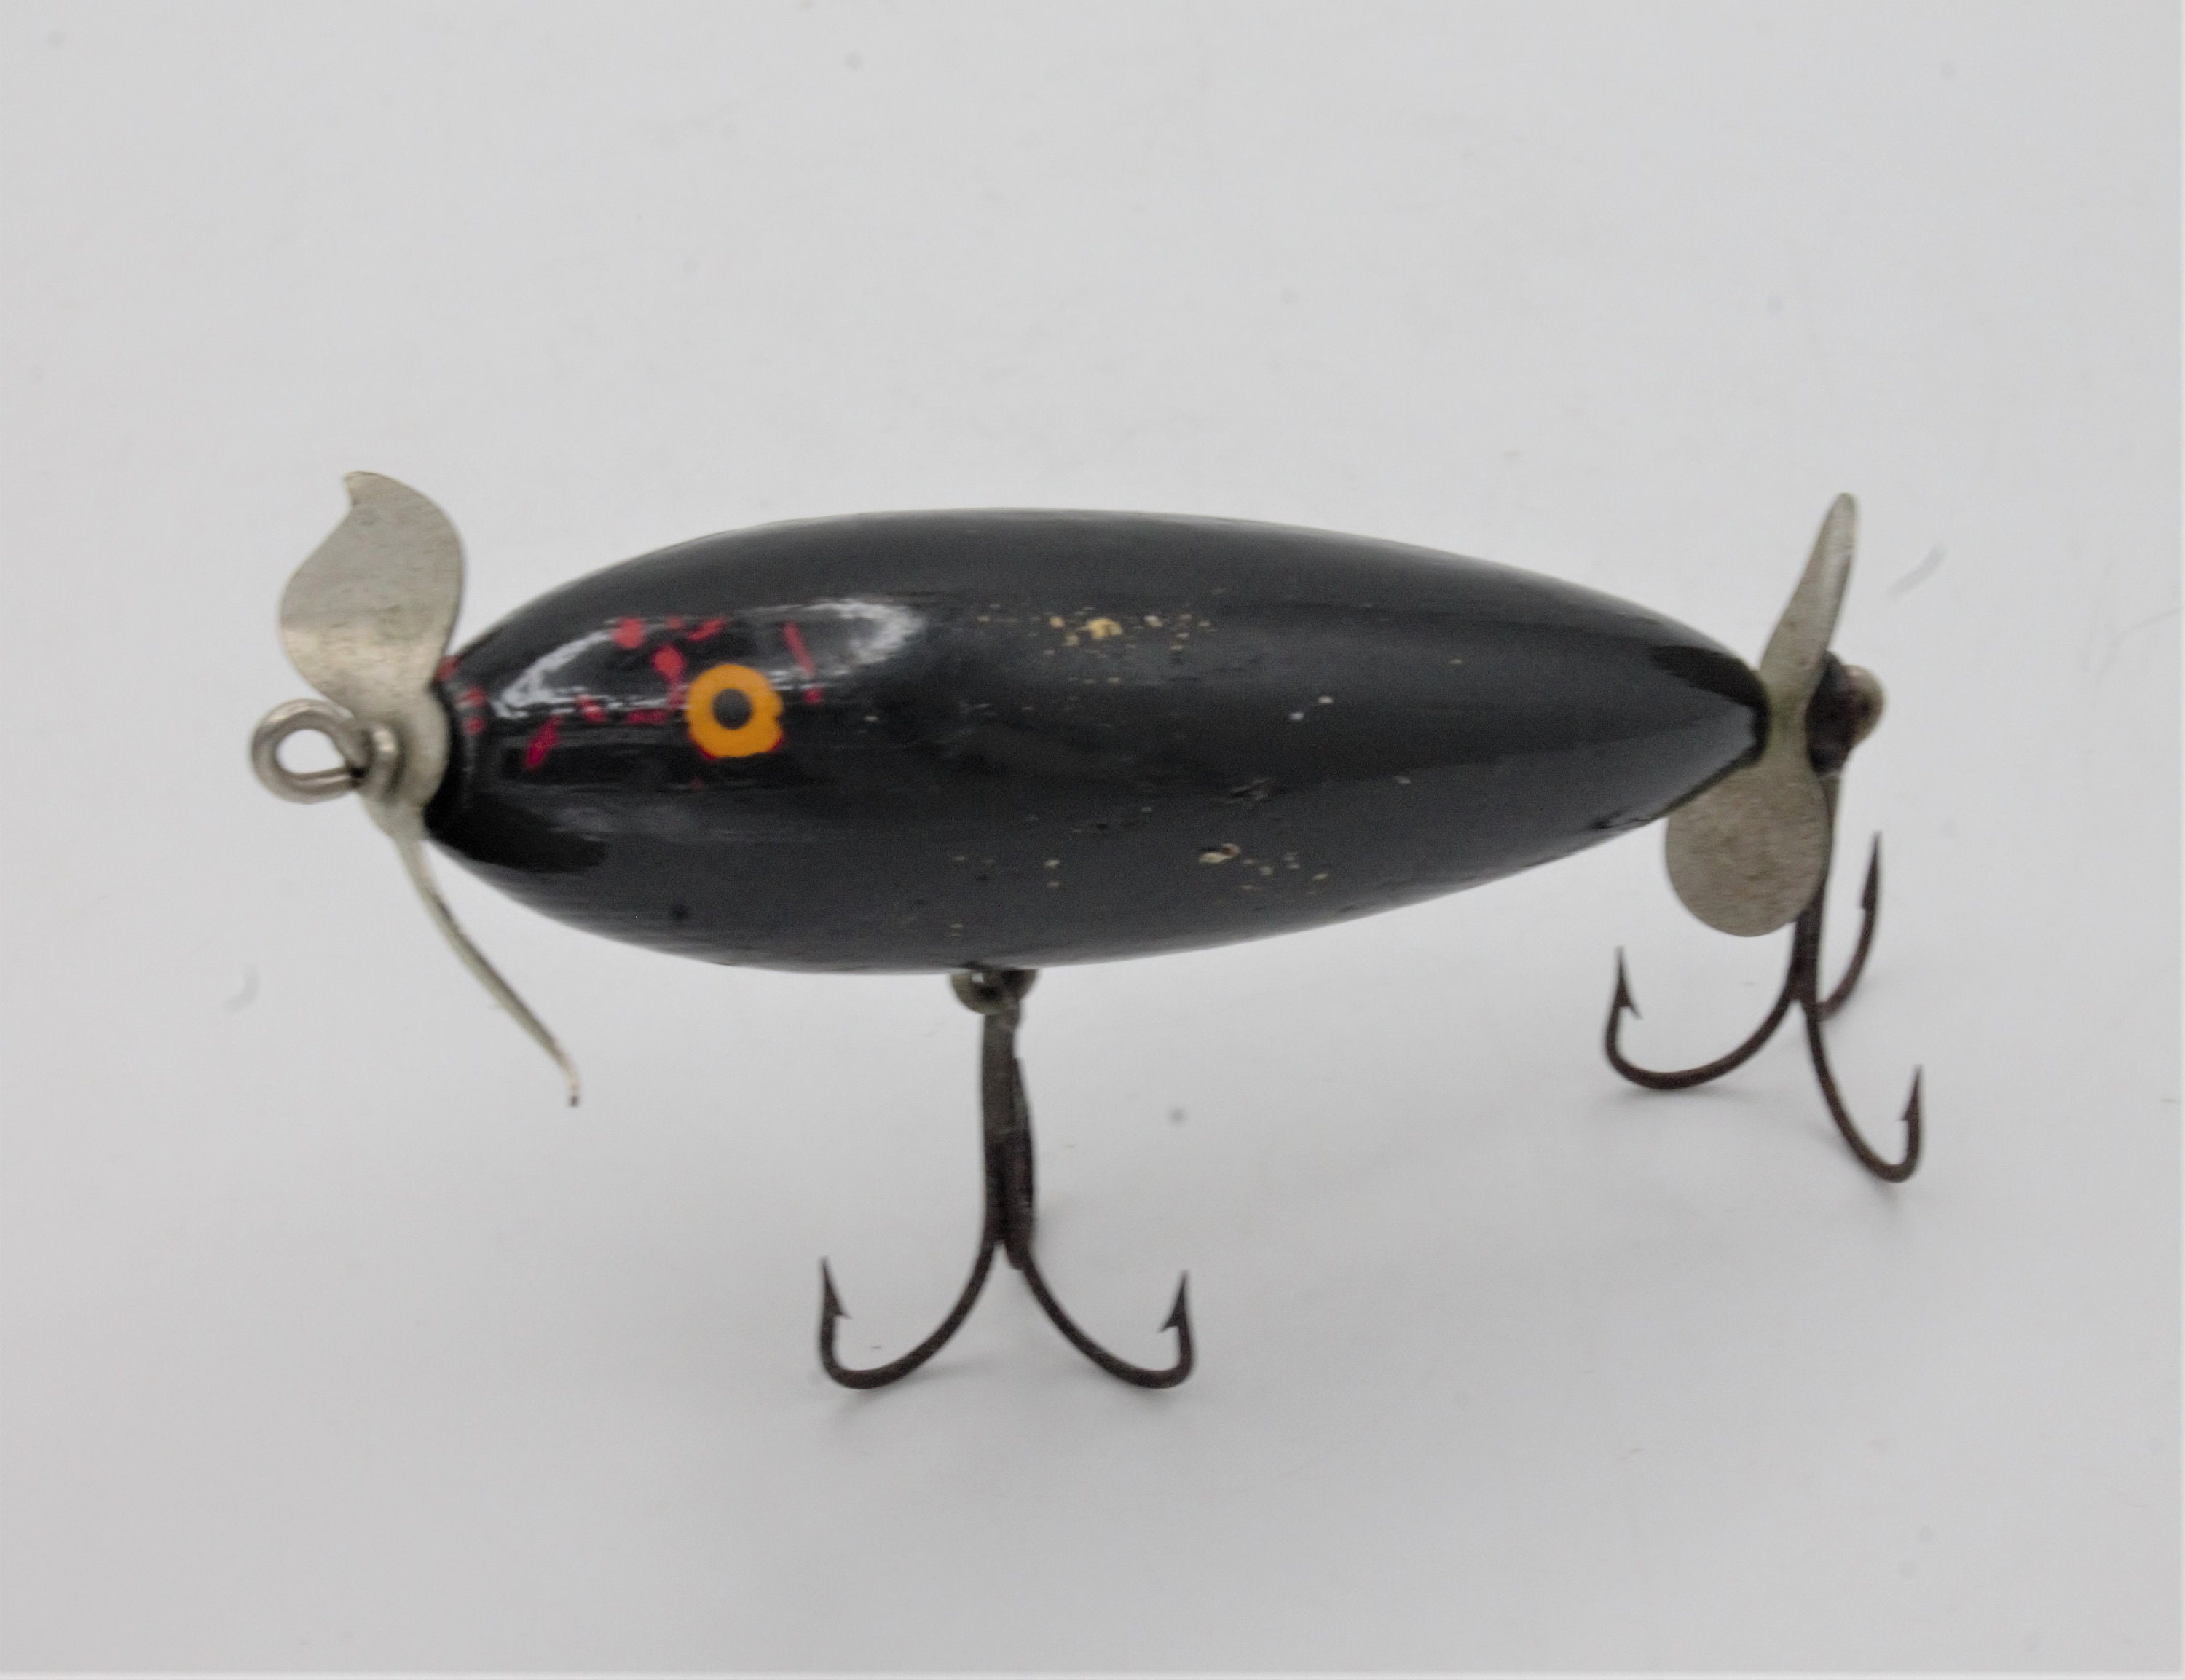 Vintage Fishing Lure 1950s Wood and Painted With Stainless Steel